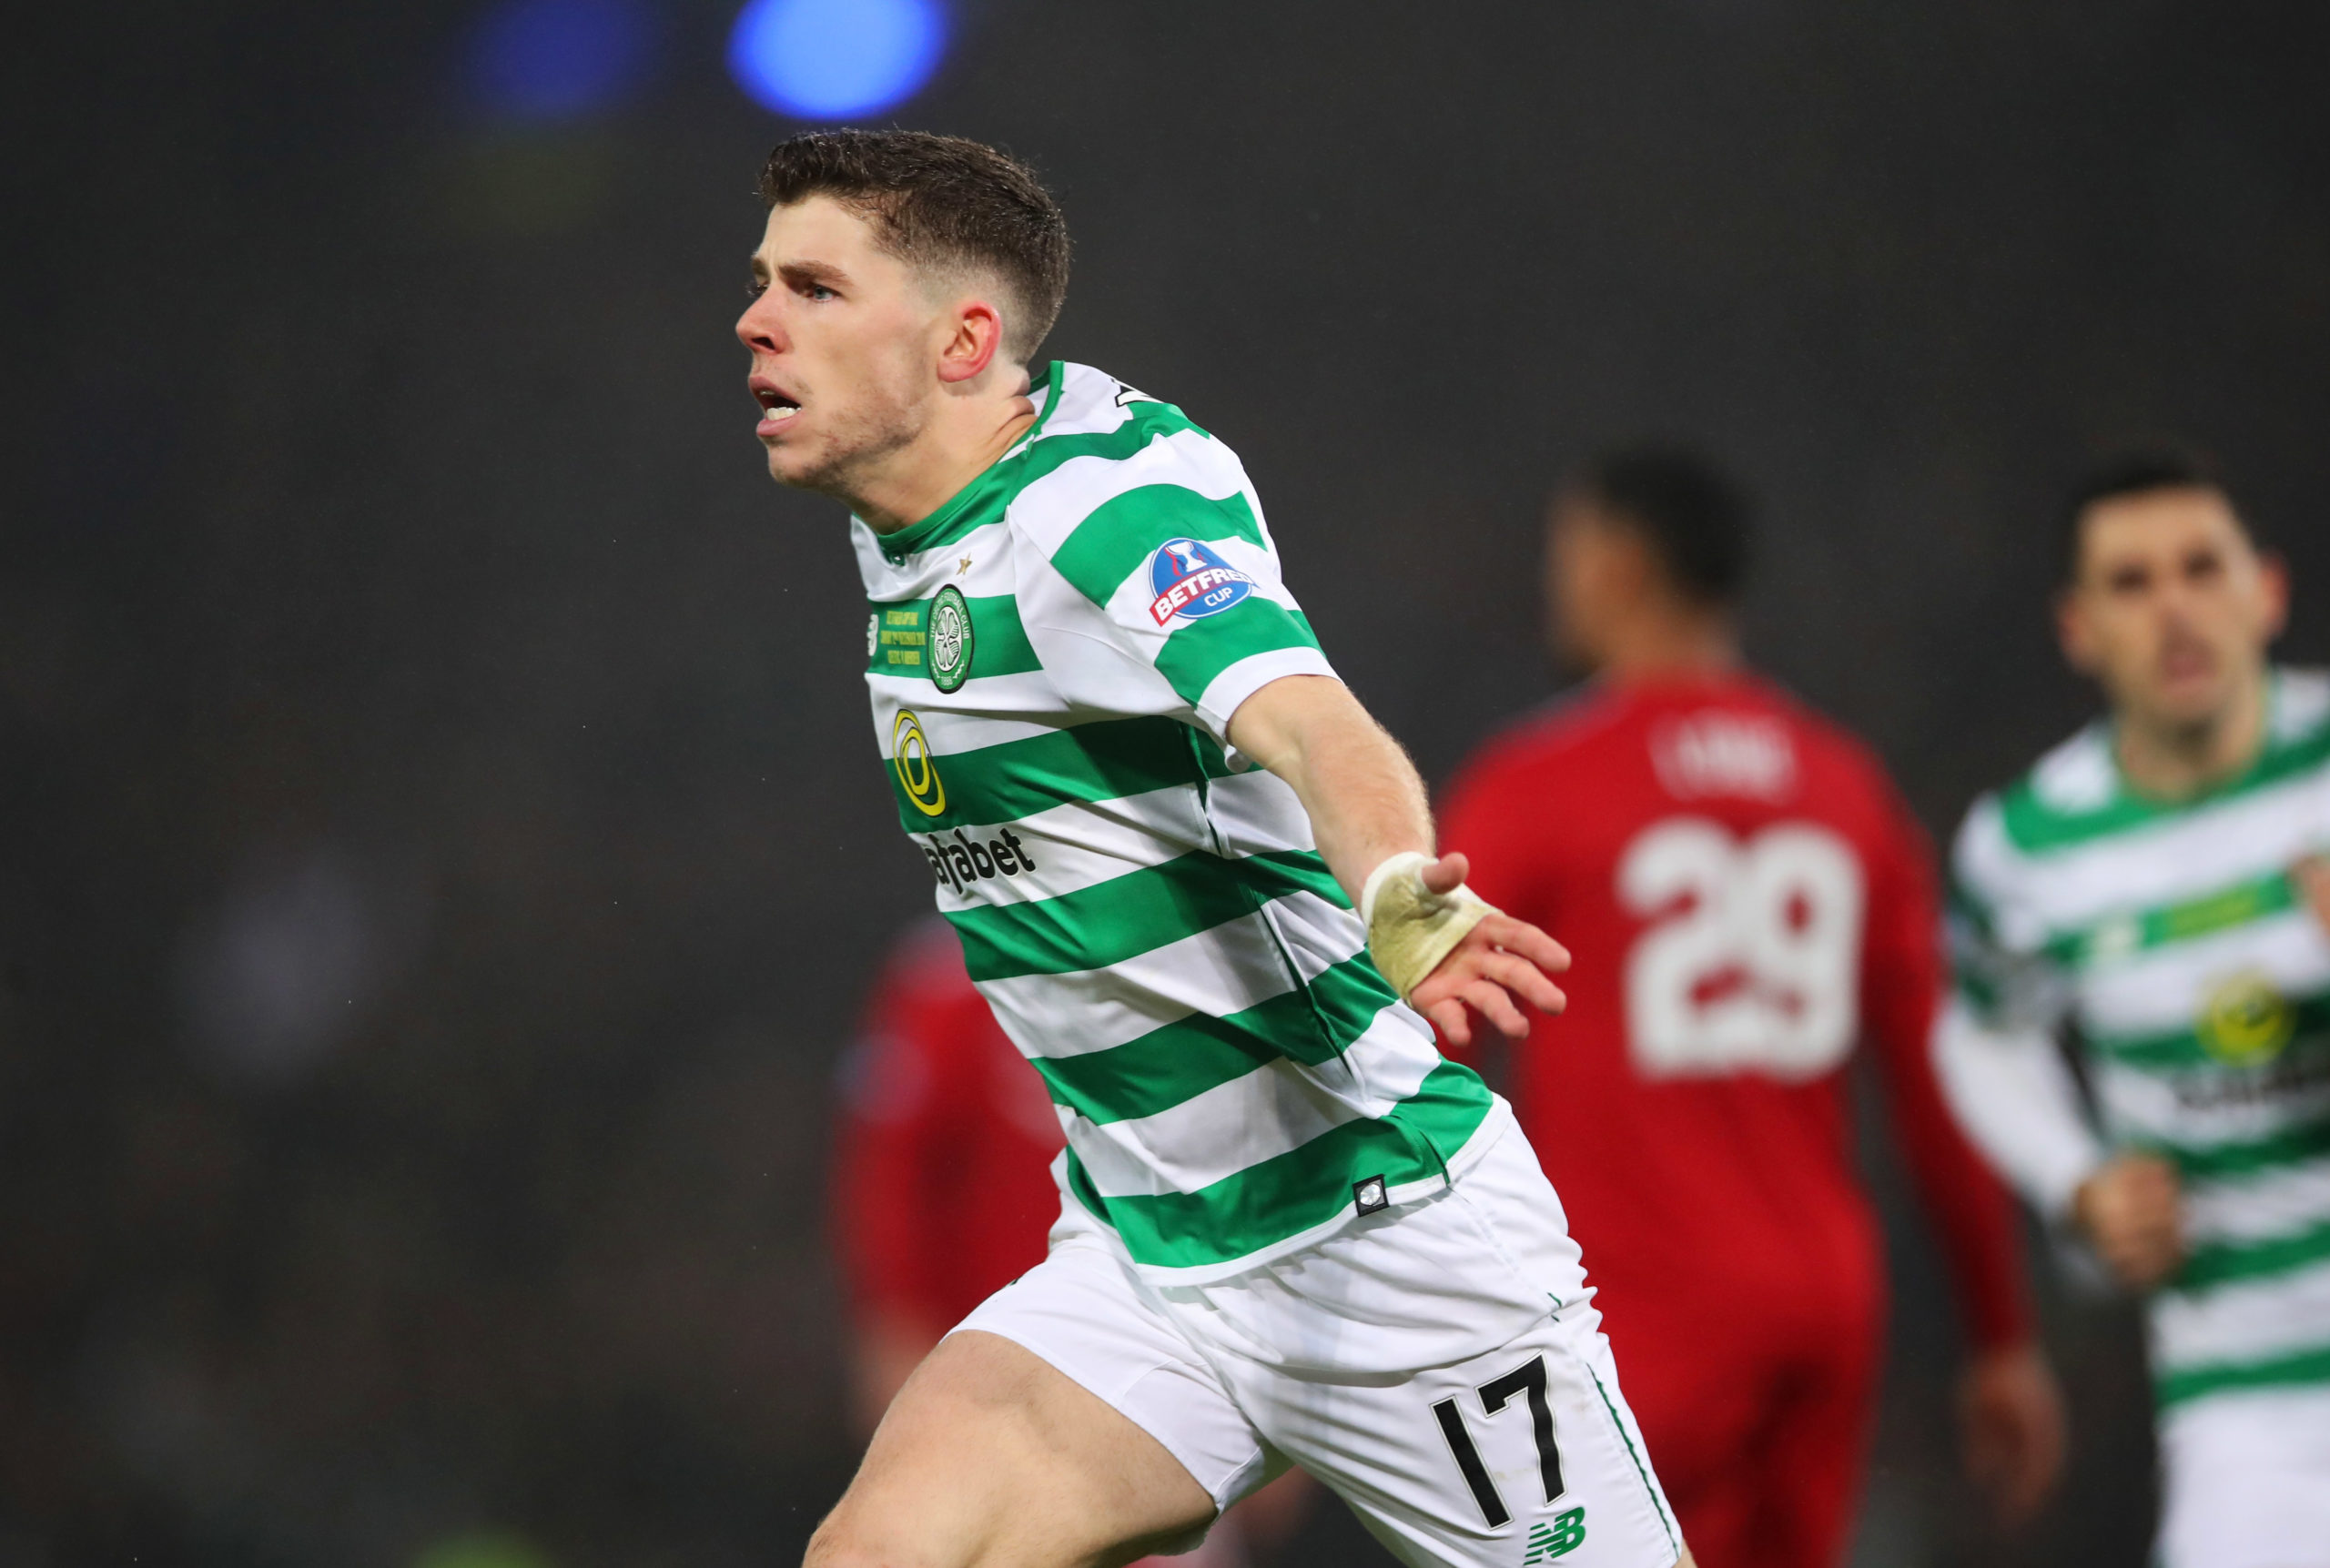 Ryan Christie could be the one to watch at Hampden; it's rarely dull for him against Aberdeen